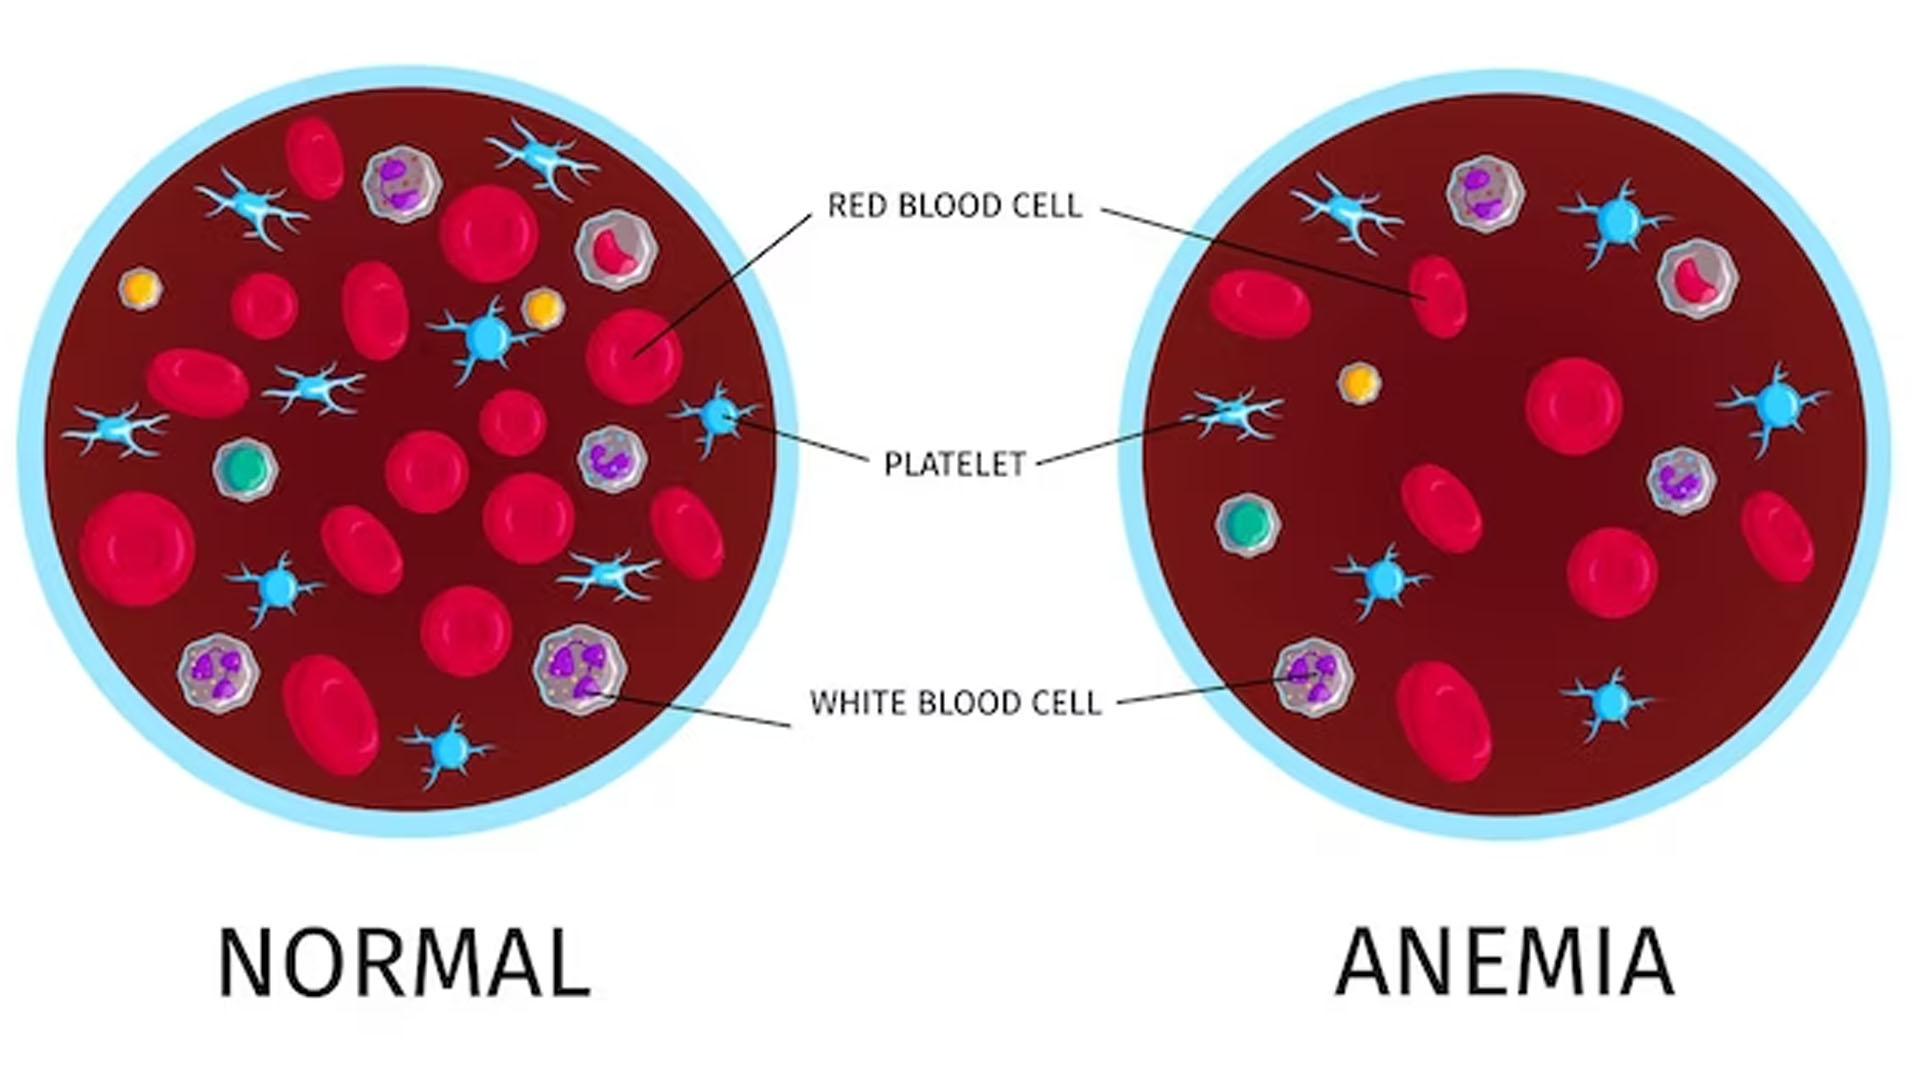 What are the Symptoms of Anemia in a Child?